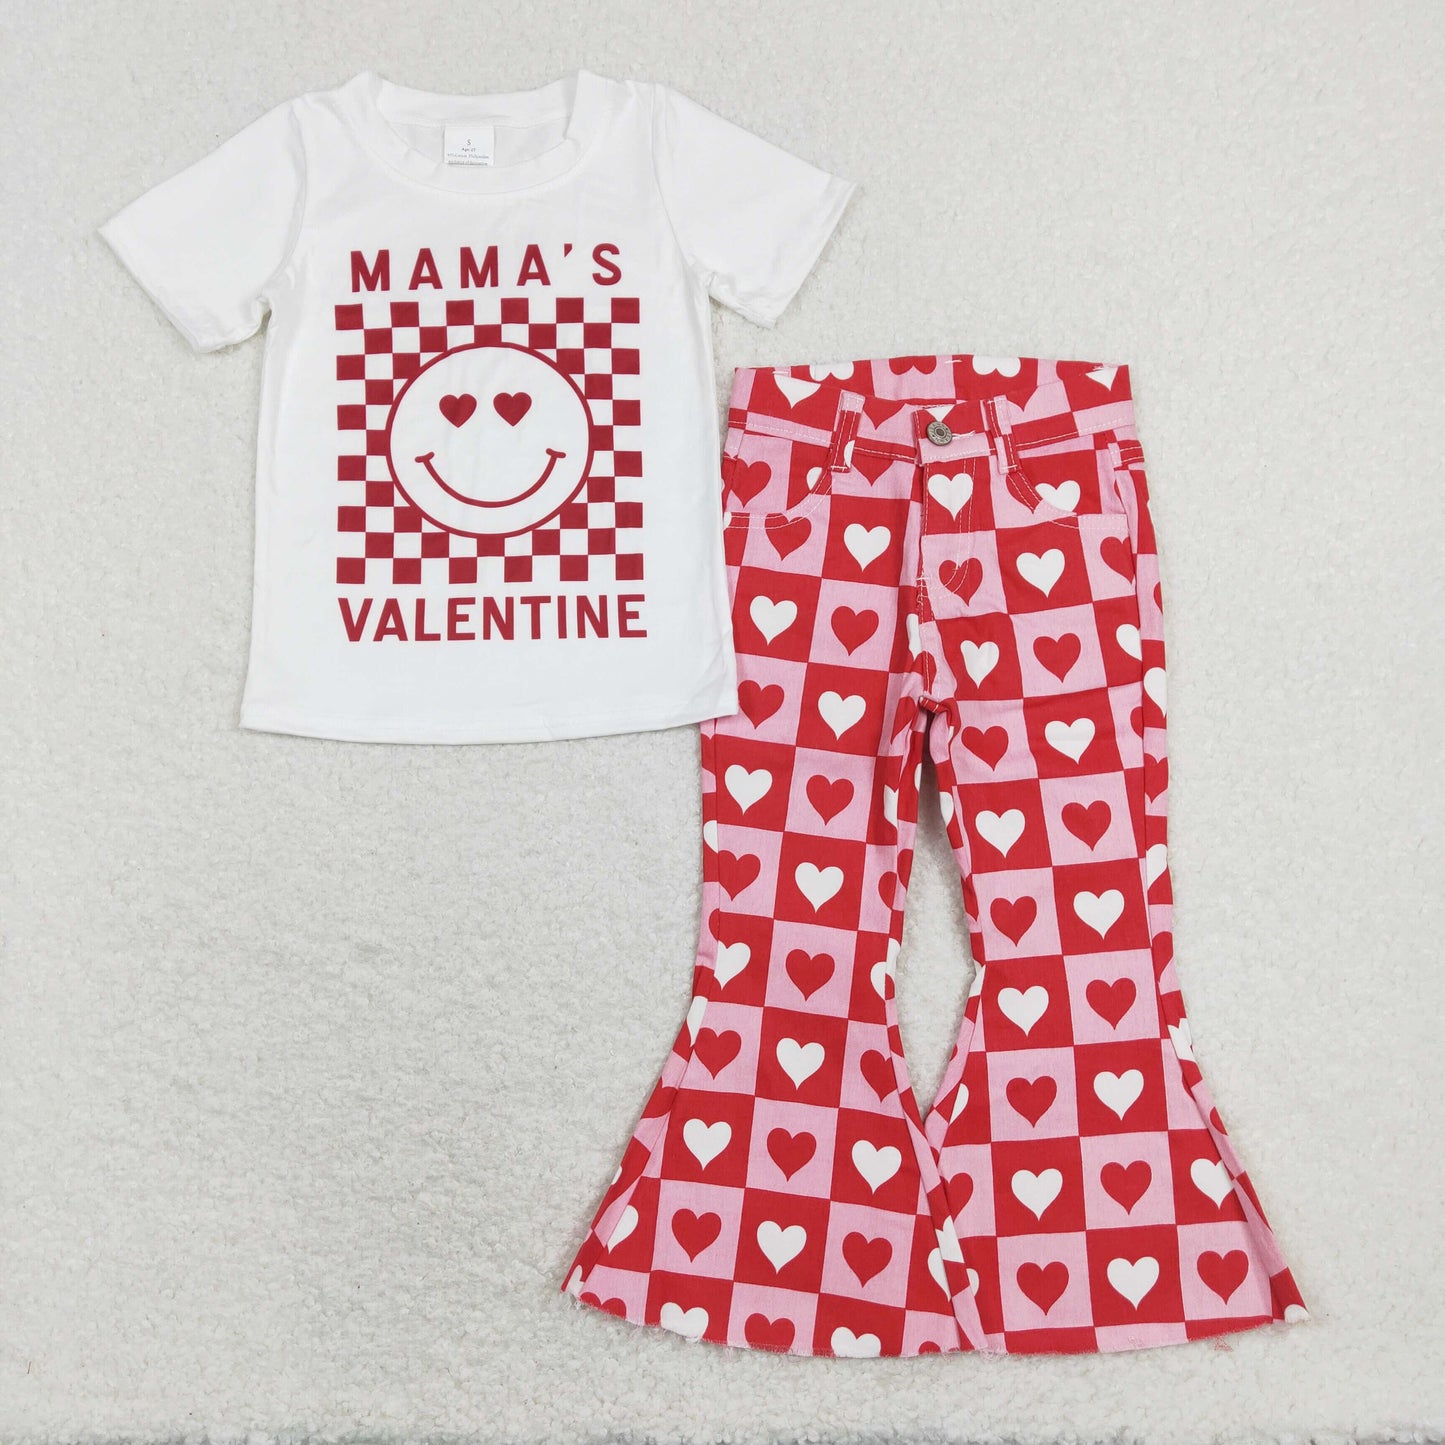 GSPO1363 Mama's Valentine Red Plaid Smiling Face Top Heart Denim Bell Bottom Jeans Girls Valentine's Clothes Set